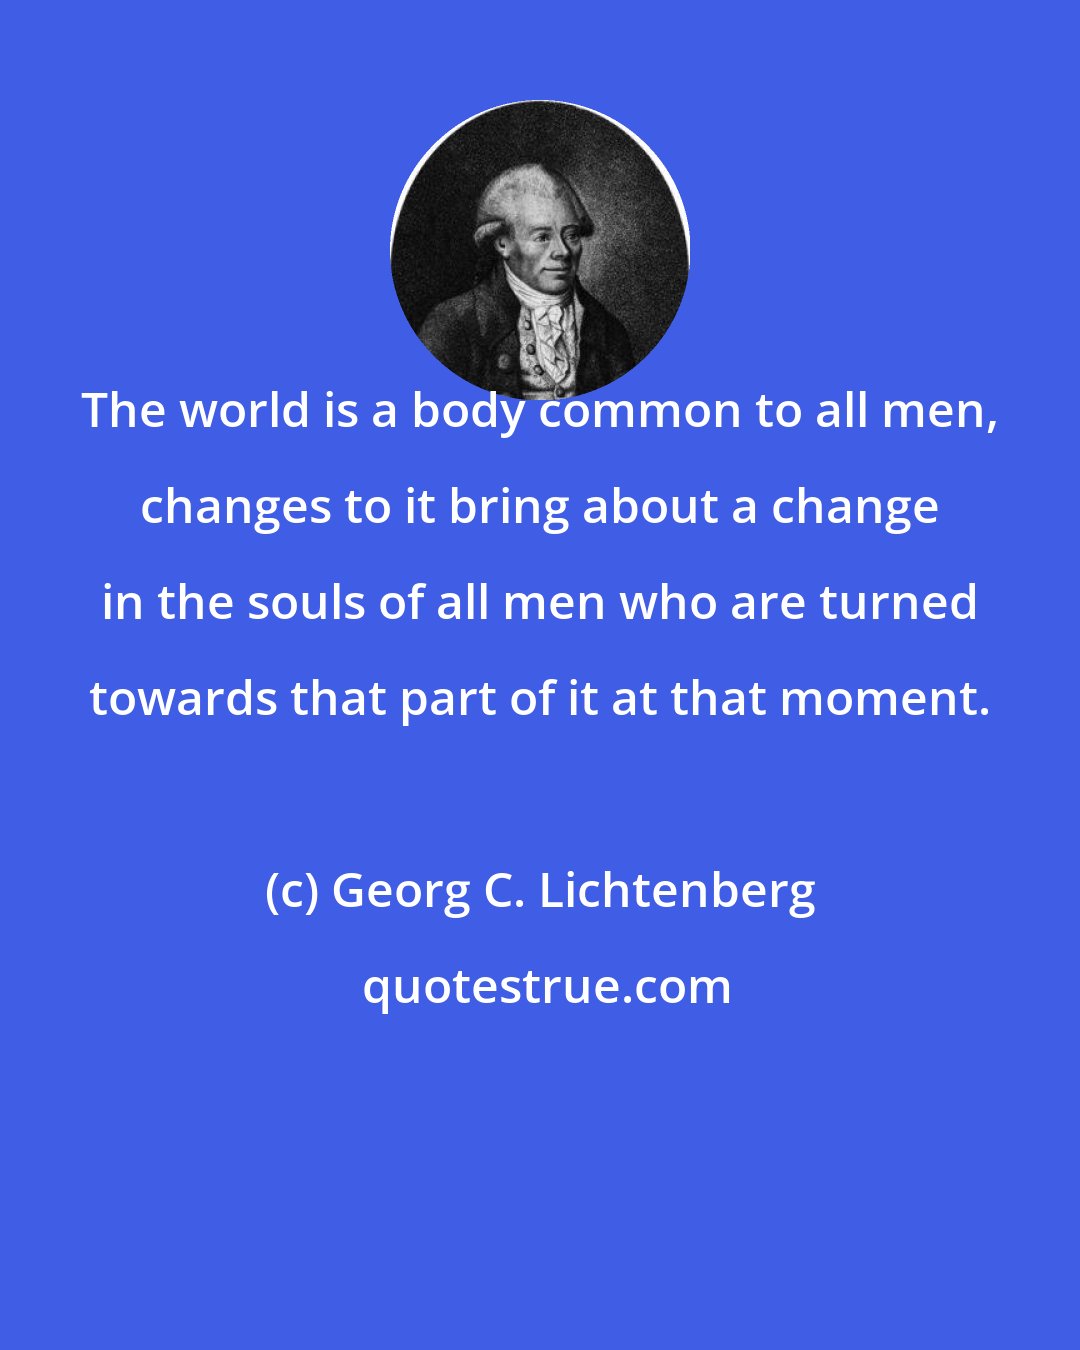 Georg C. Lichtenberg: The world is a body common to all men, changes to it bring about a change in the souls of all men who are turned towards that part of it at that moment.